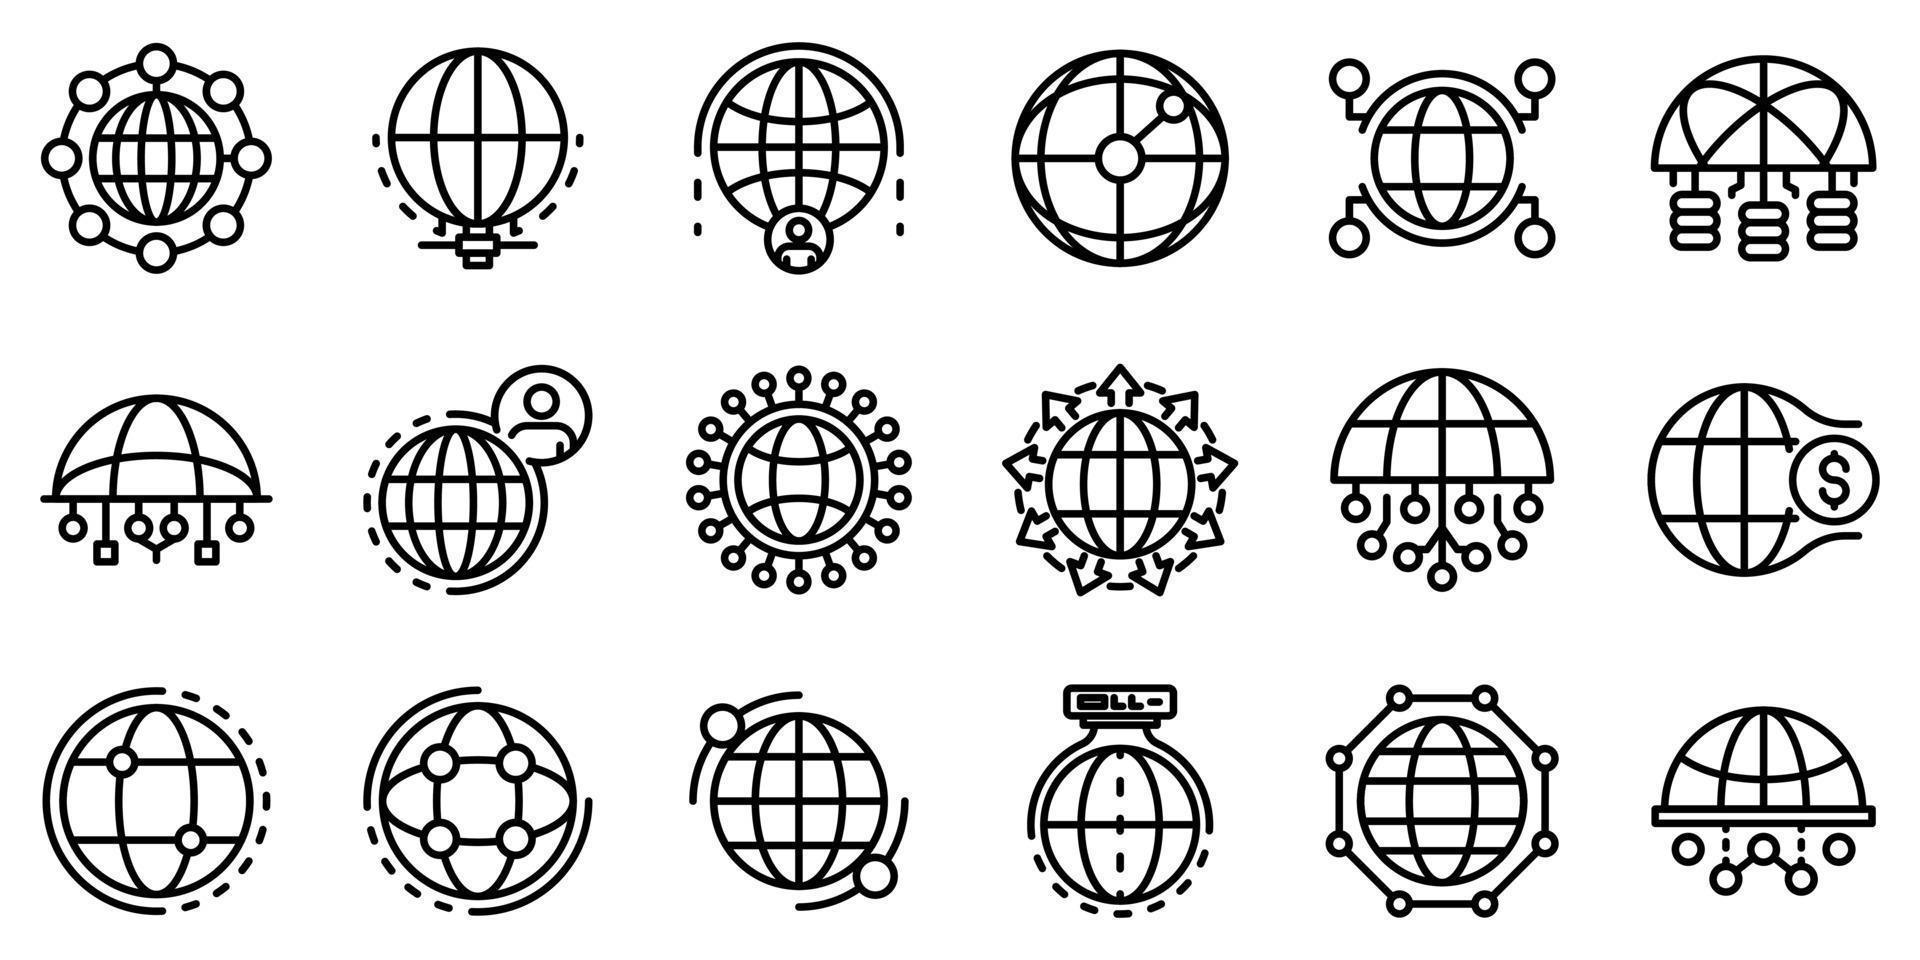 Global network icons set, outline style vector